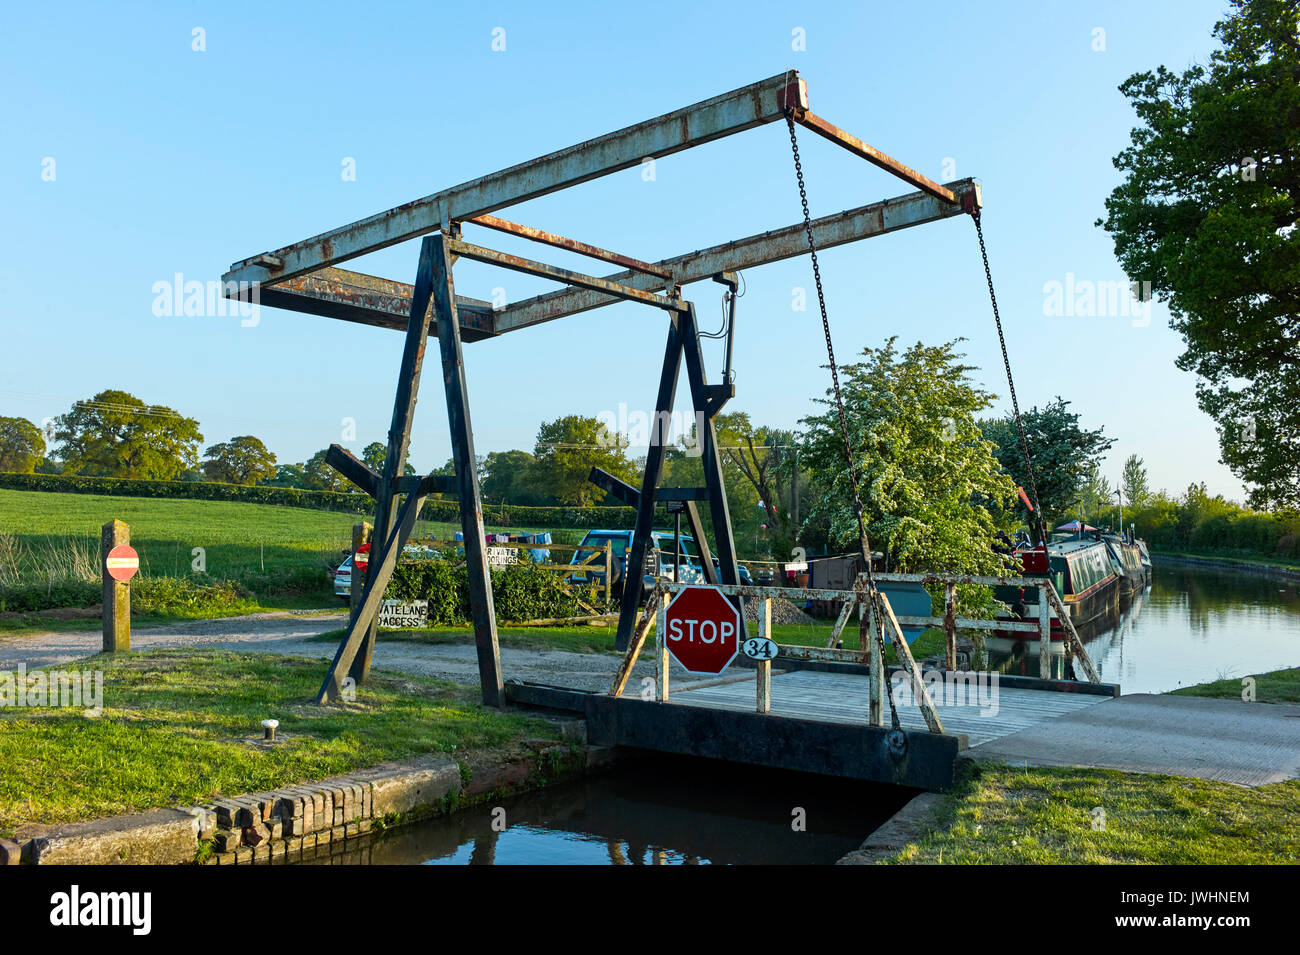 Lift bridge number 34 near Whitchurch on the Llangollen canal Stock Photo